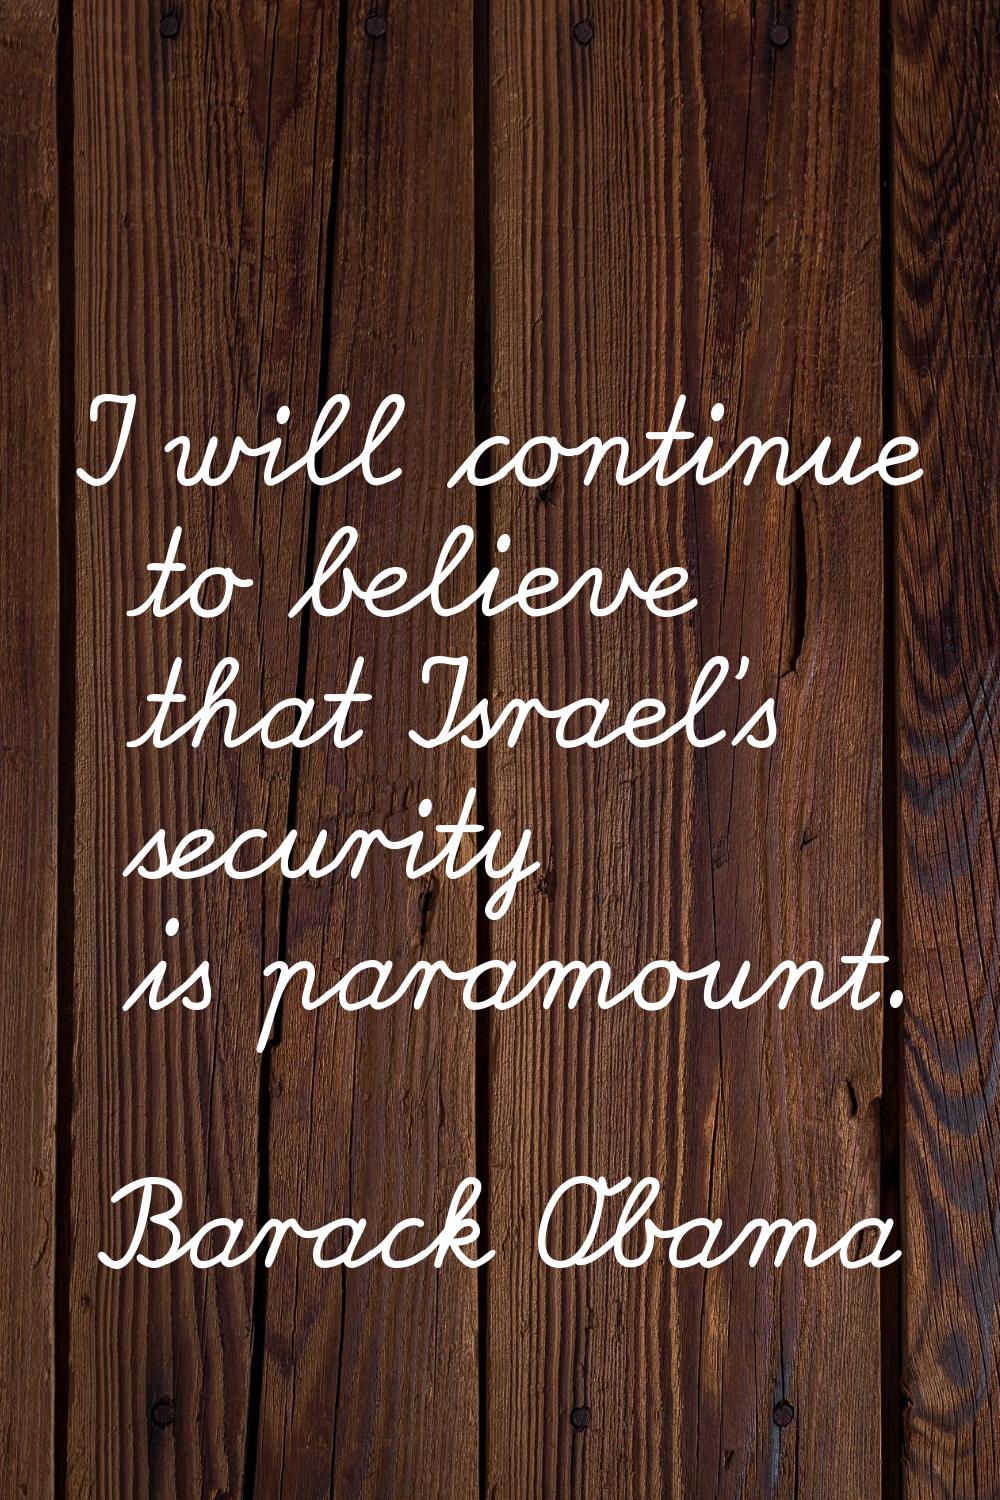 I will continue to believe that Israel's security is paramount.